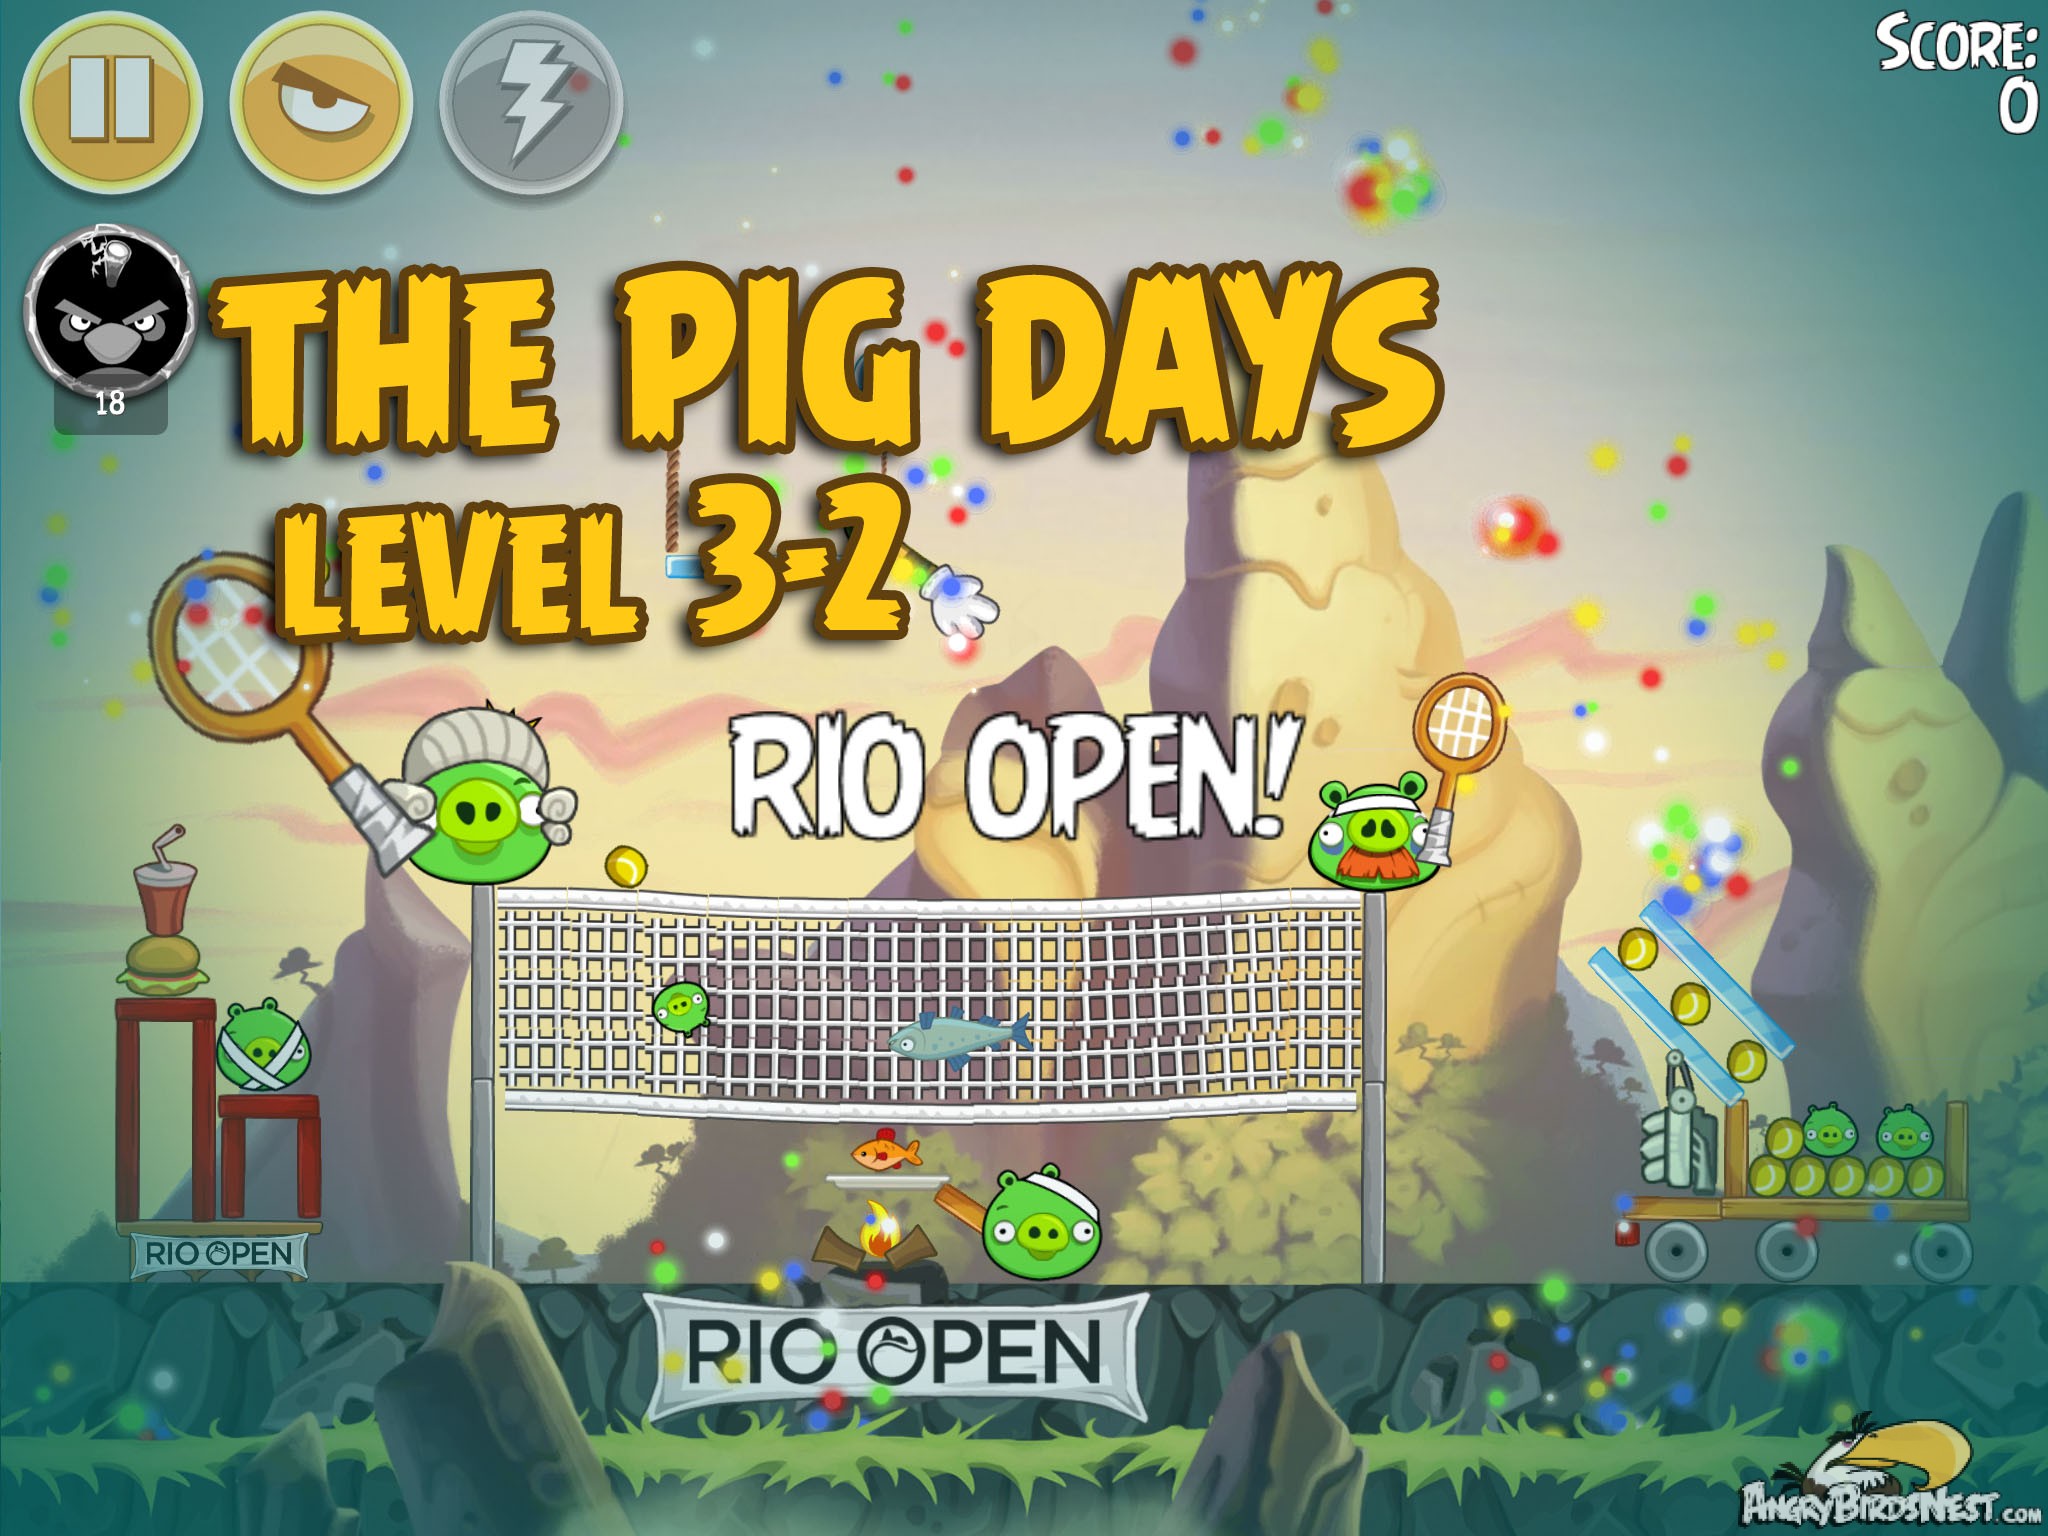 Angry Birds Seasons The Pig Days 3-2 Rio Open